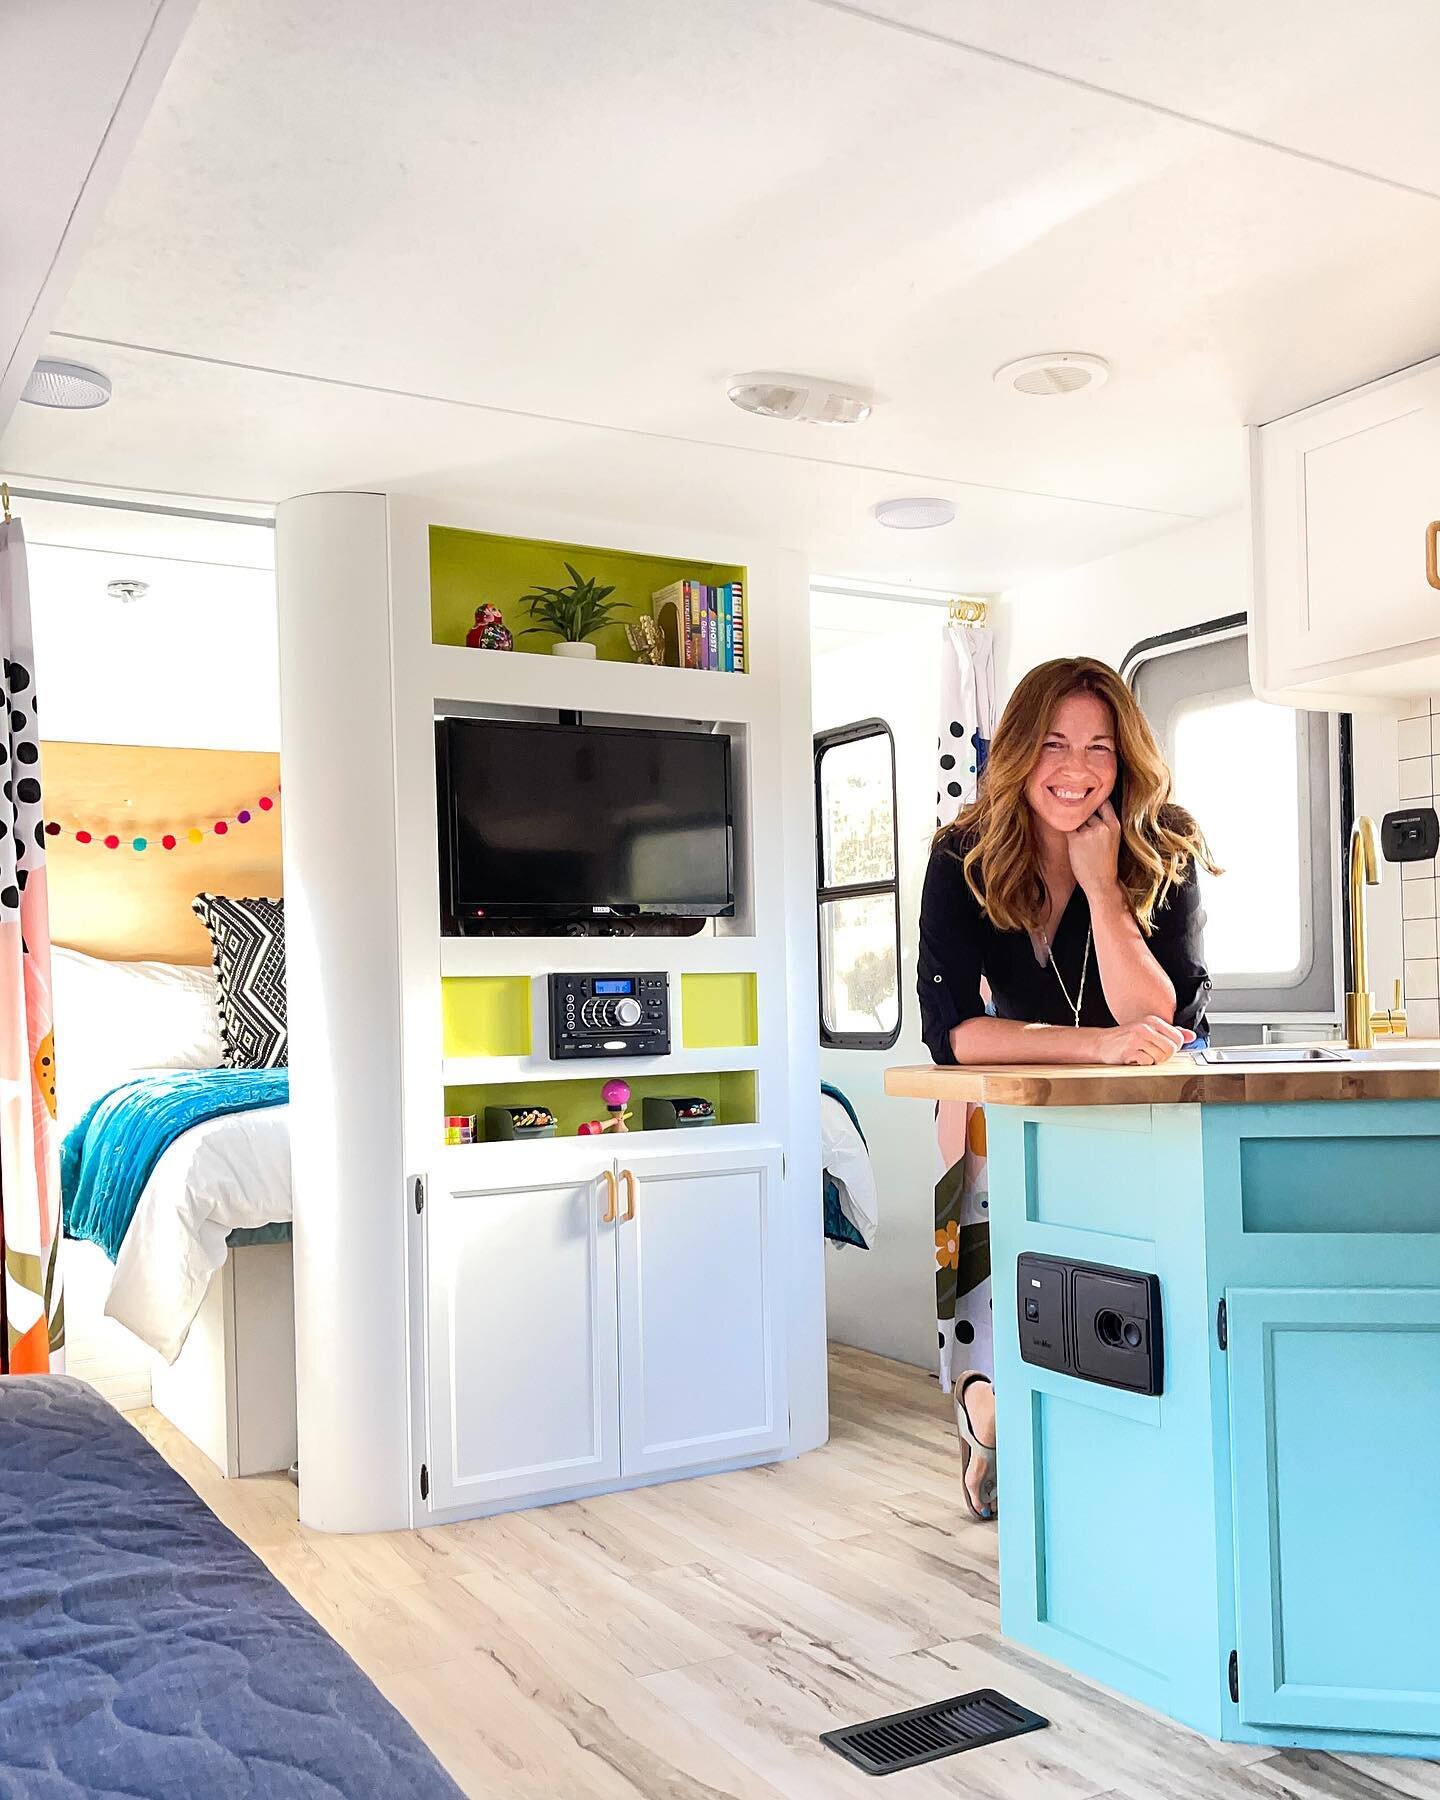 Now this is my idea of camping! I hope our guests feel joyful, relaxed, inspired and playful when they come stay in this sweet RV. I know I can&rsquo;t wait to have a slumber party in here with Ani to test it out! Do you have a favorite element in th